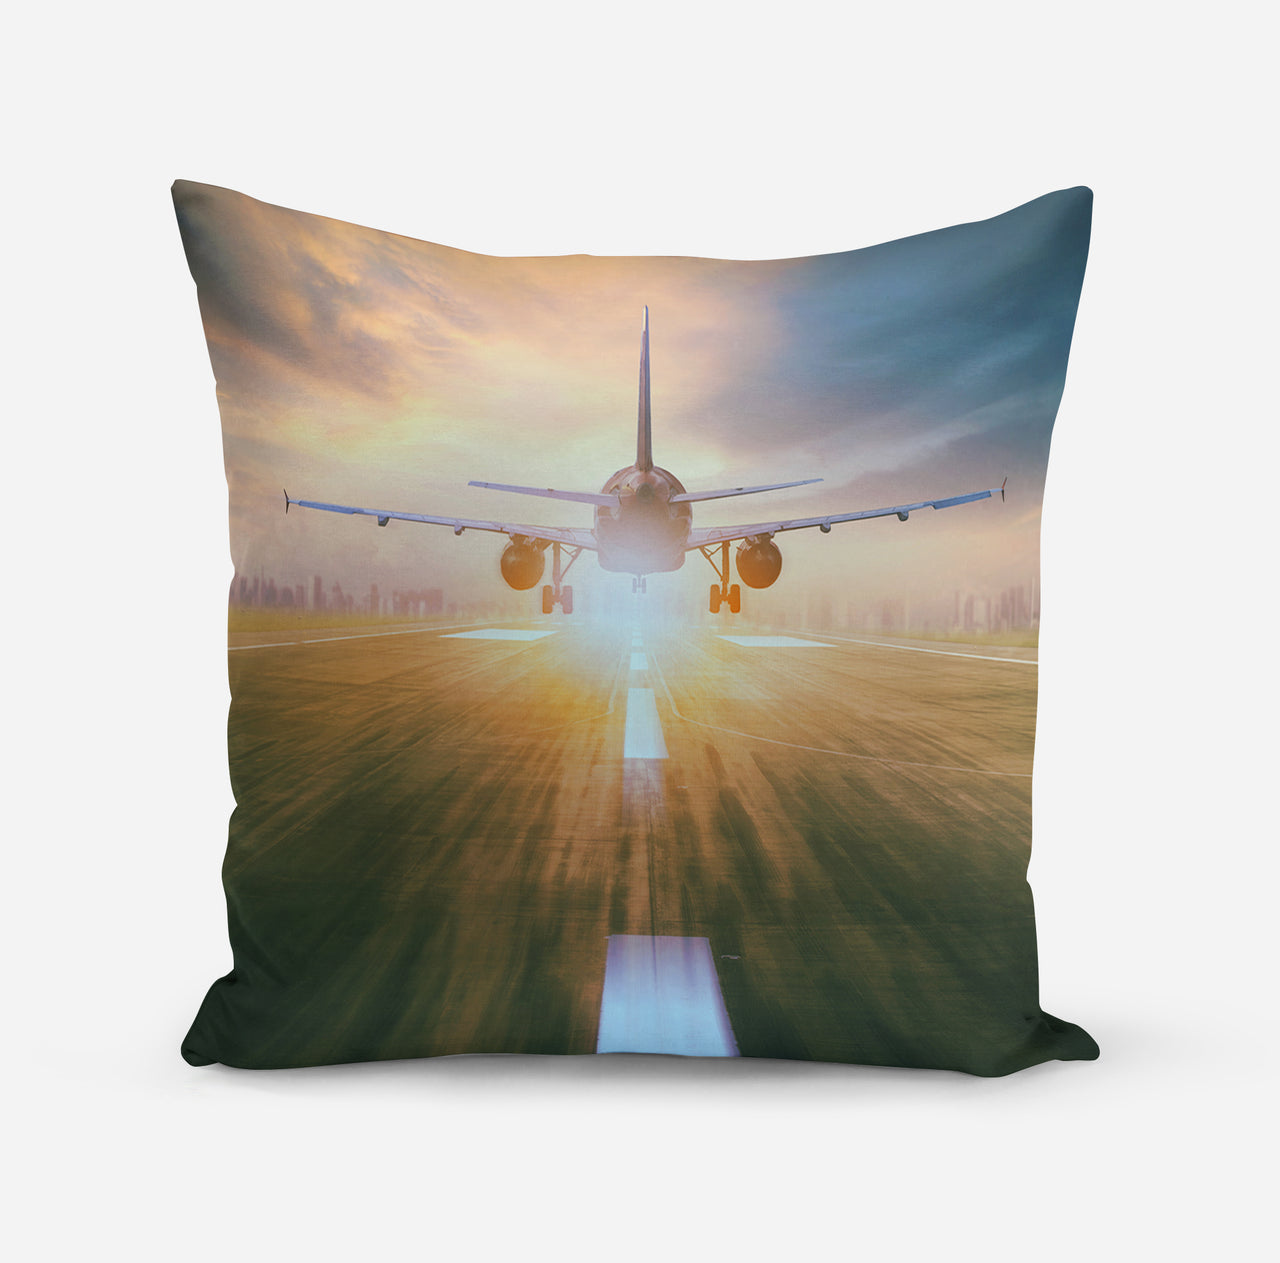 Airplane Flying Over Runway Designed Pillows